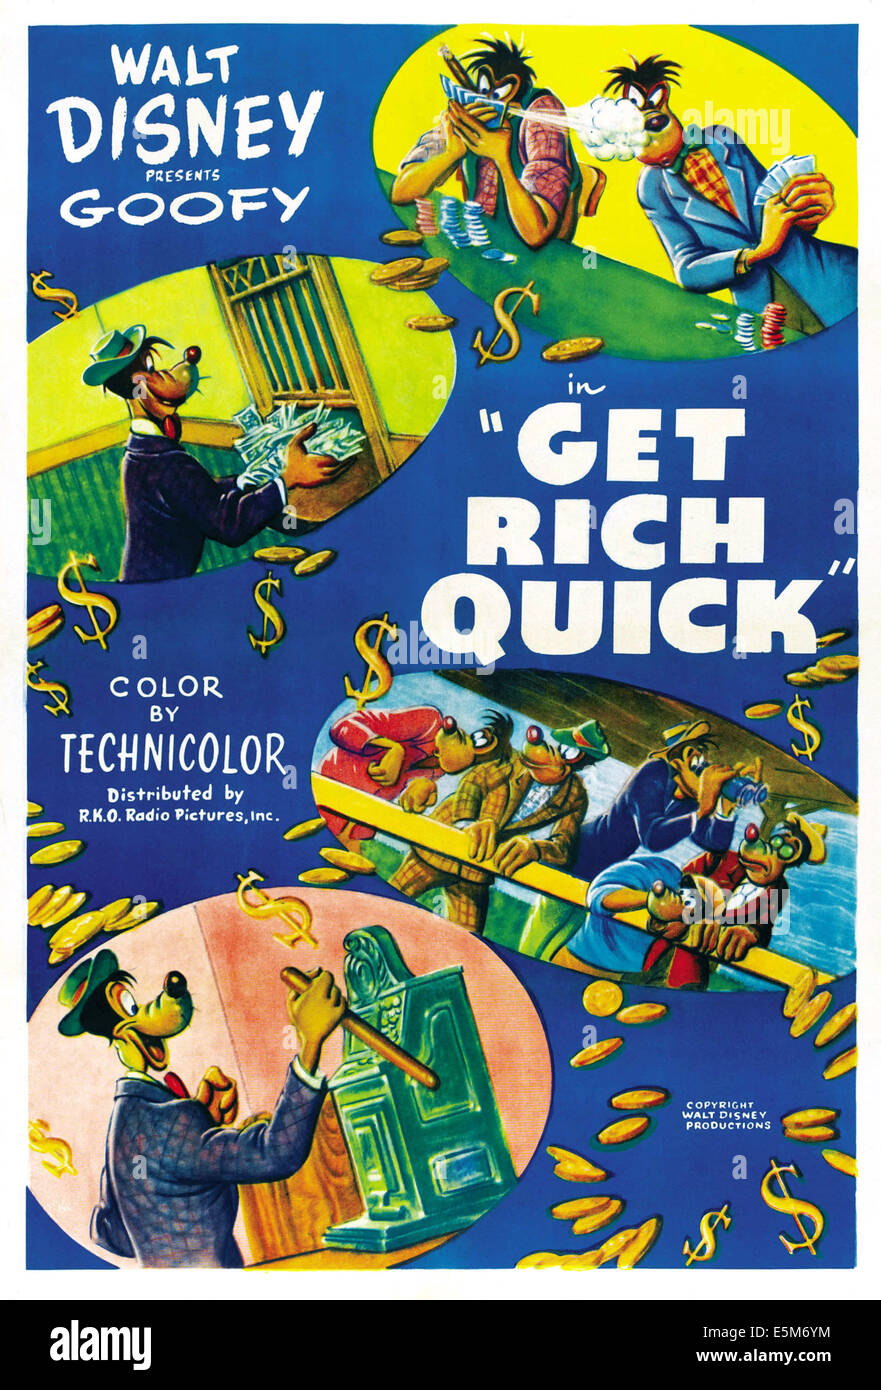 GET RICH QUICK, poster art for Walt Disney animated short, Goofy (top and bottom left, bottom, second from right), 1951 Stock Photo